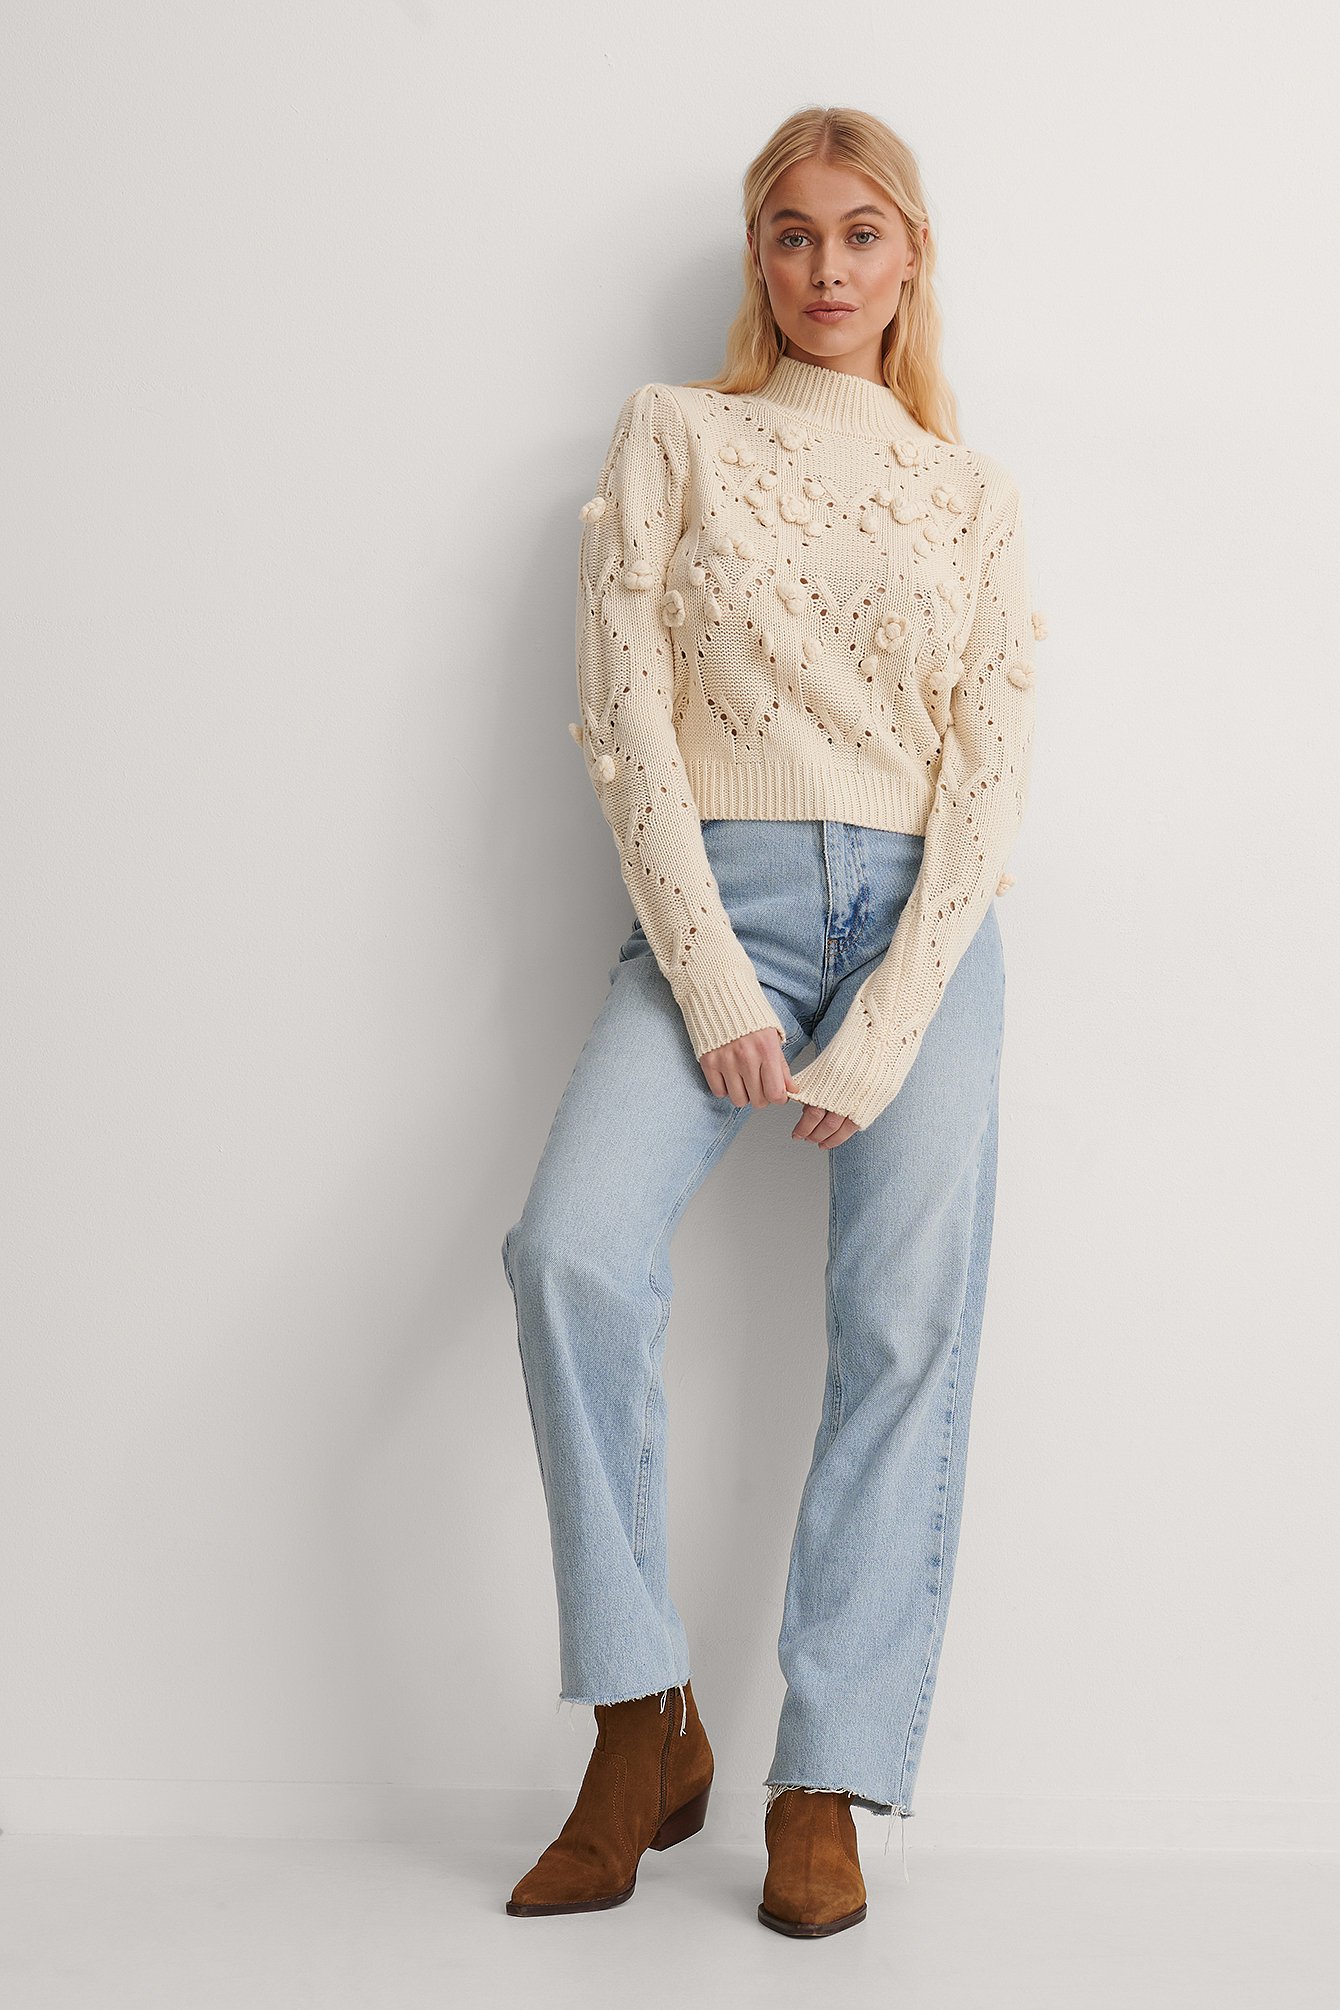 Pom Pom Detail High Neck Knitted Sweater Outfit.